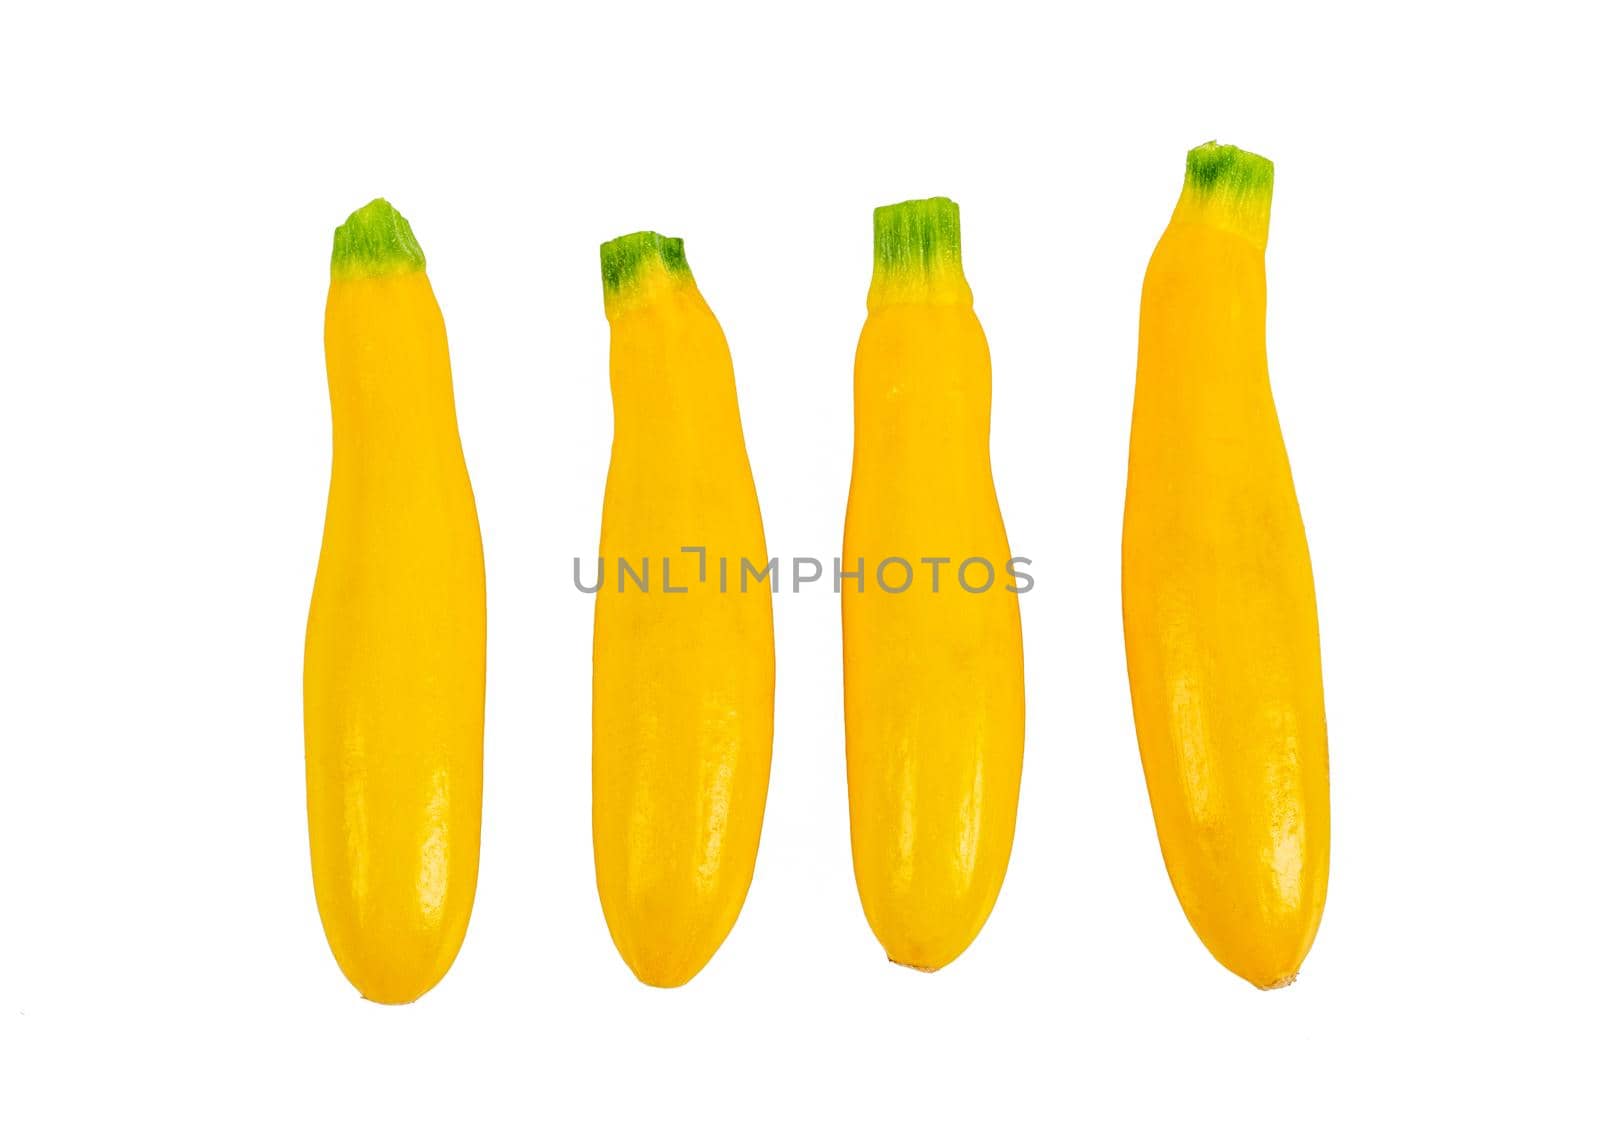 Summer squash or yellow squash on white background by Sonat